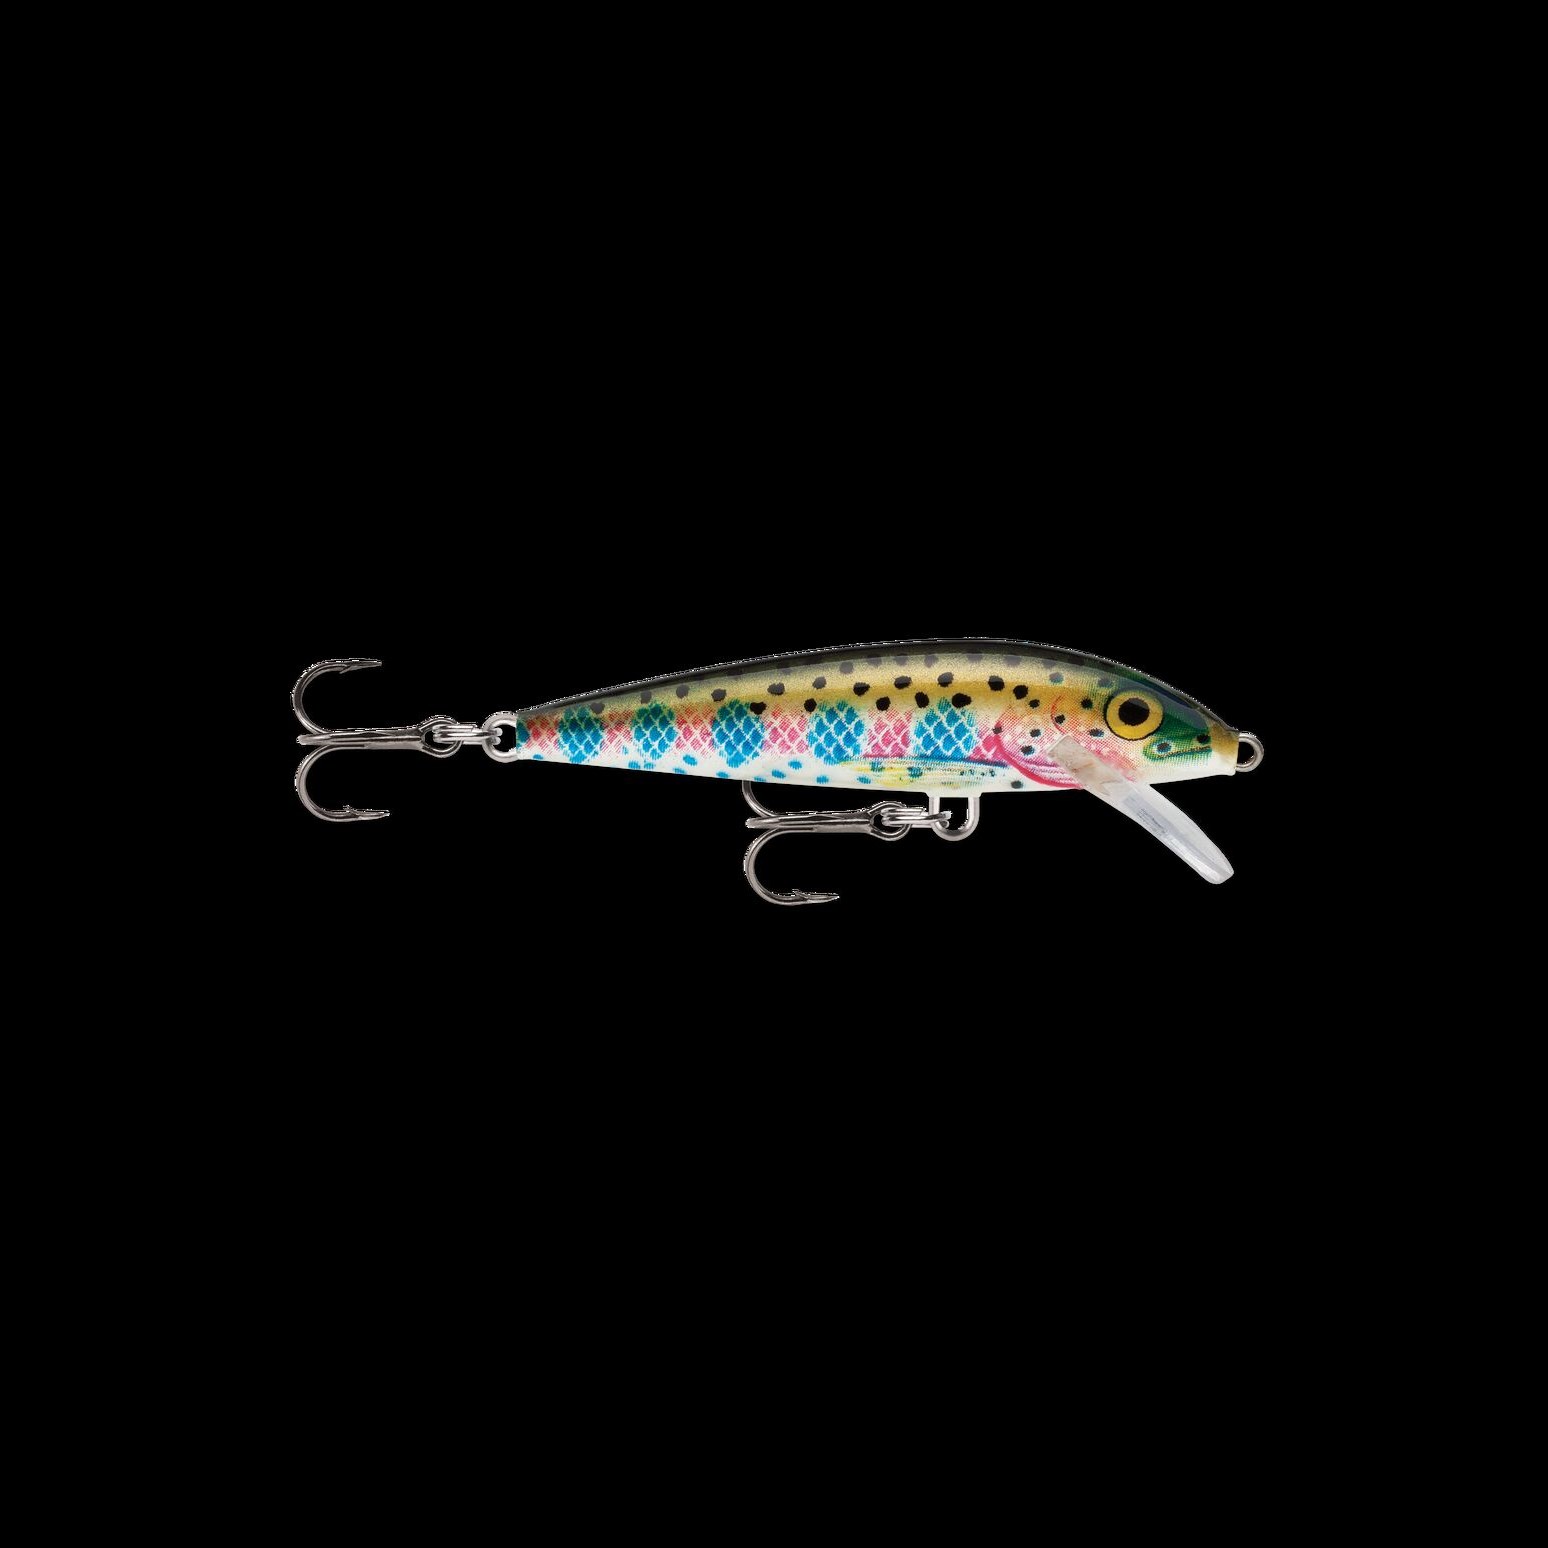 Original Floating® F05RT Hard Bait Lure Wood Rainbow Trout 2 Overall  Length 0.0625 oz - Bait & Lures, Rapala